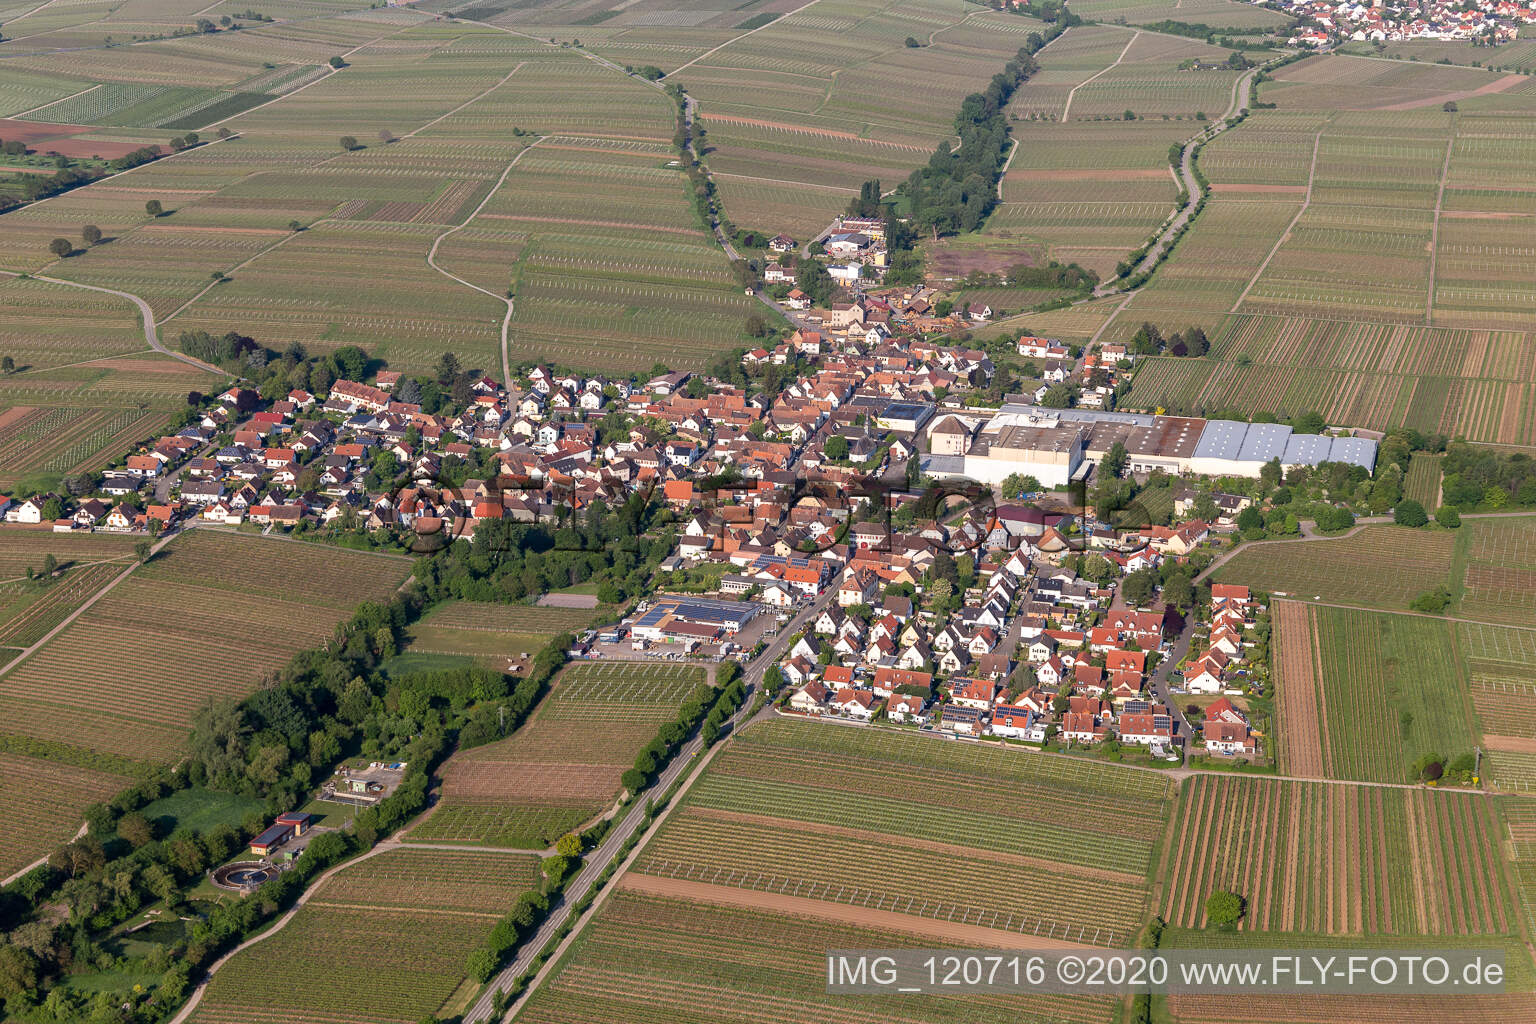 Böchingen in the state Rhineland-Palatinate, Germany seen from a drone